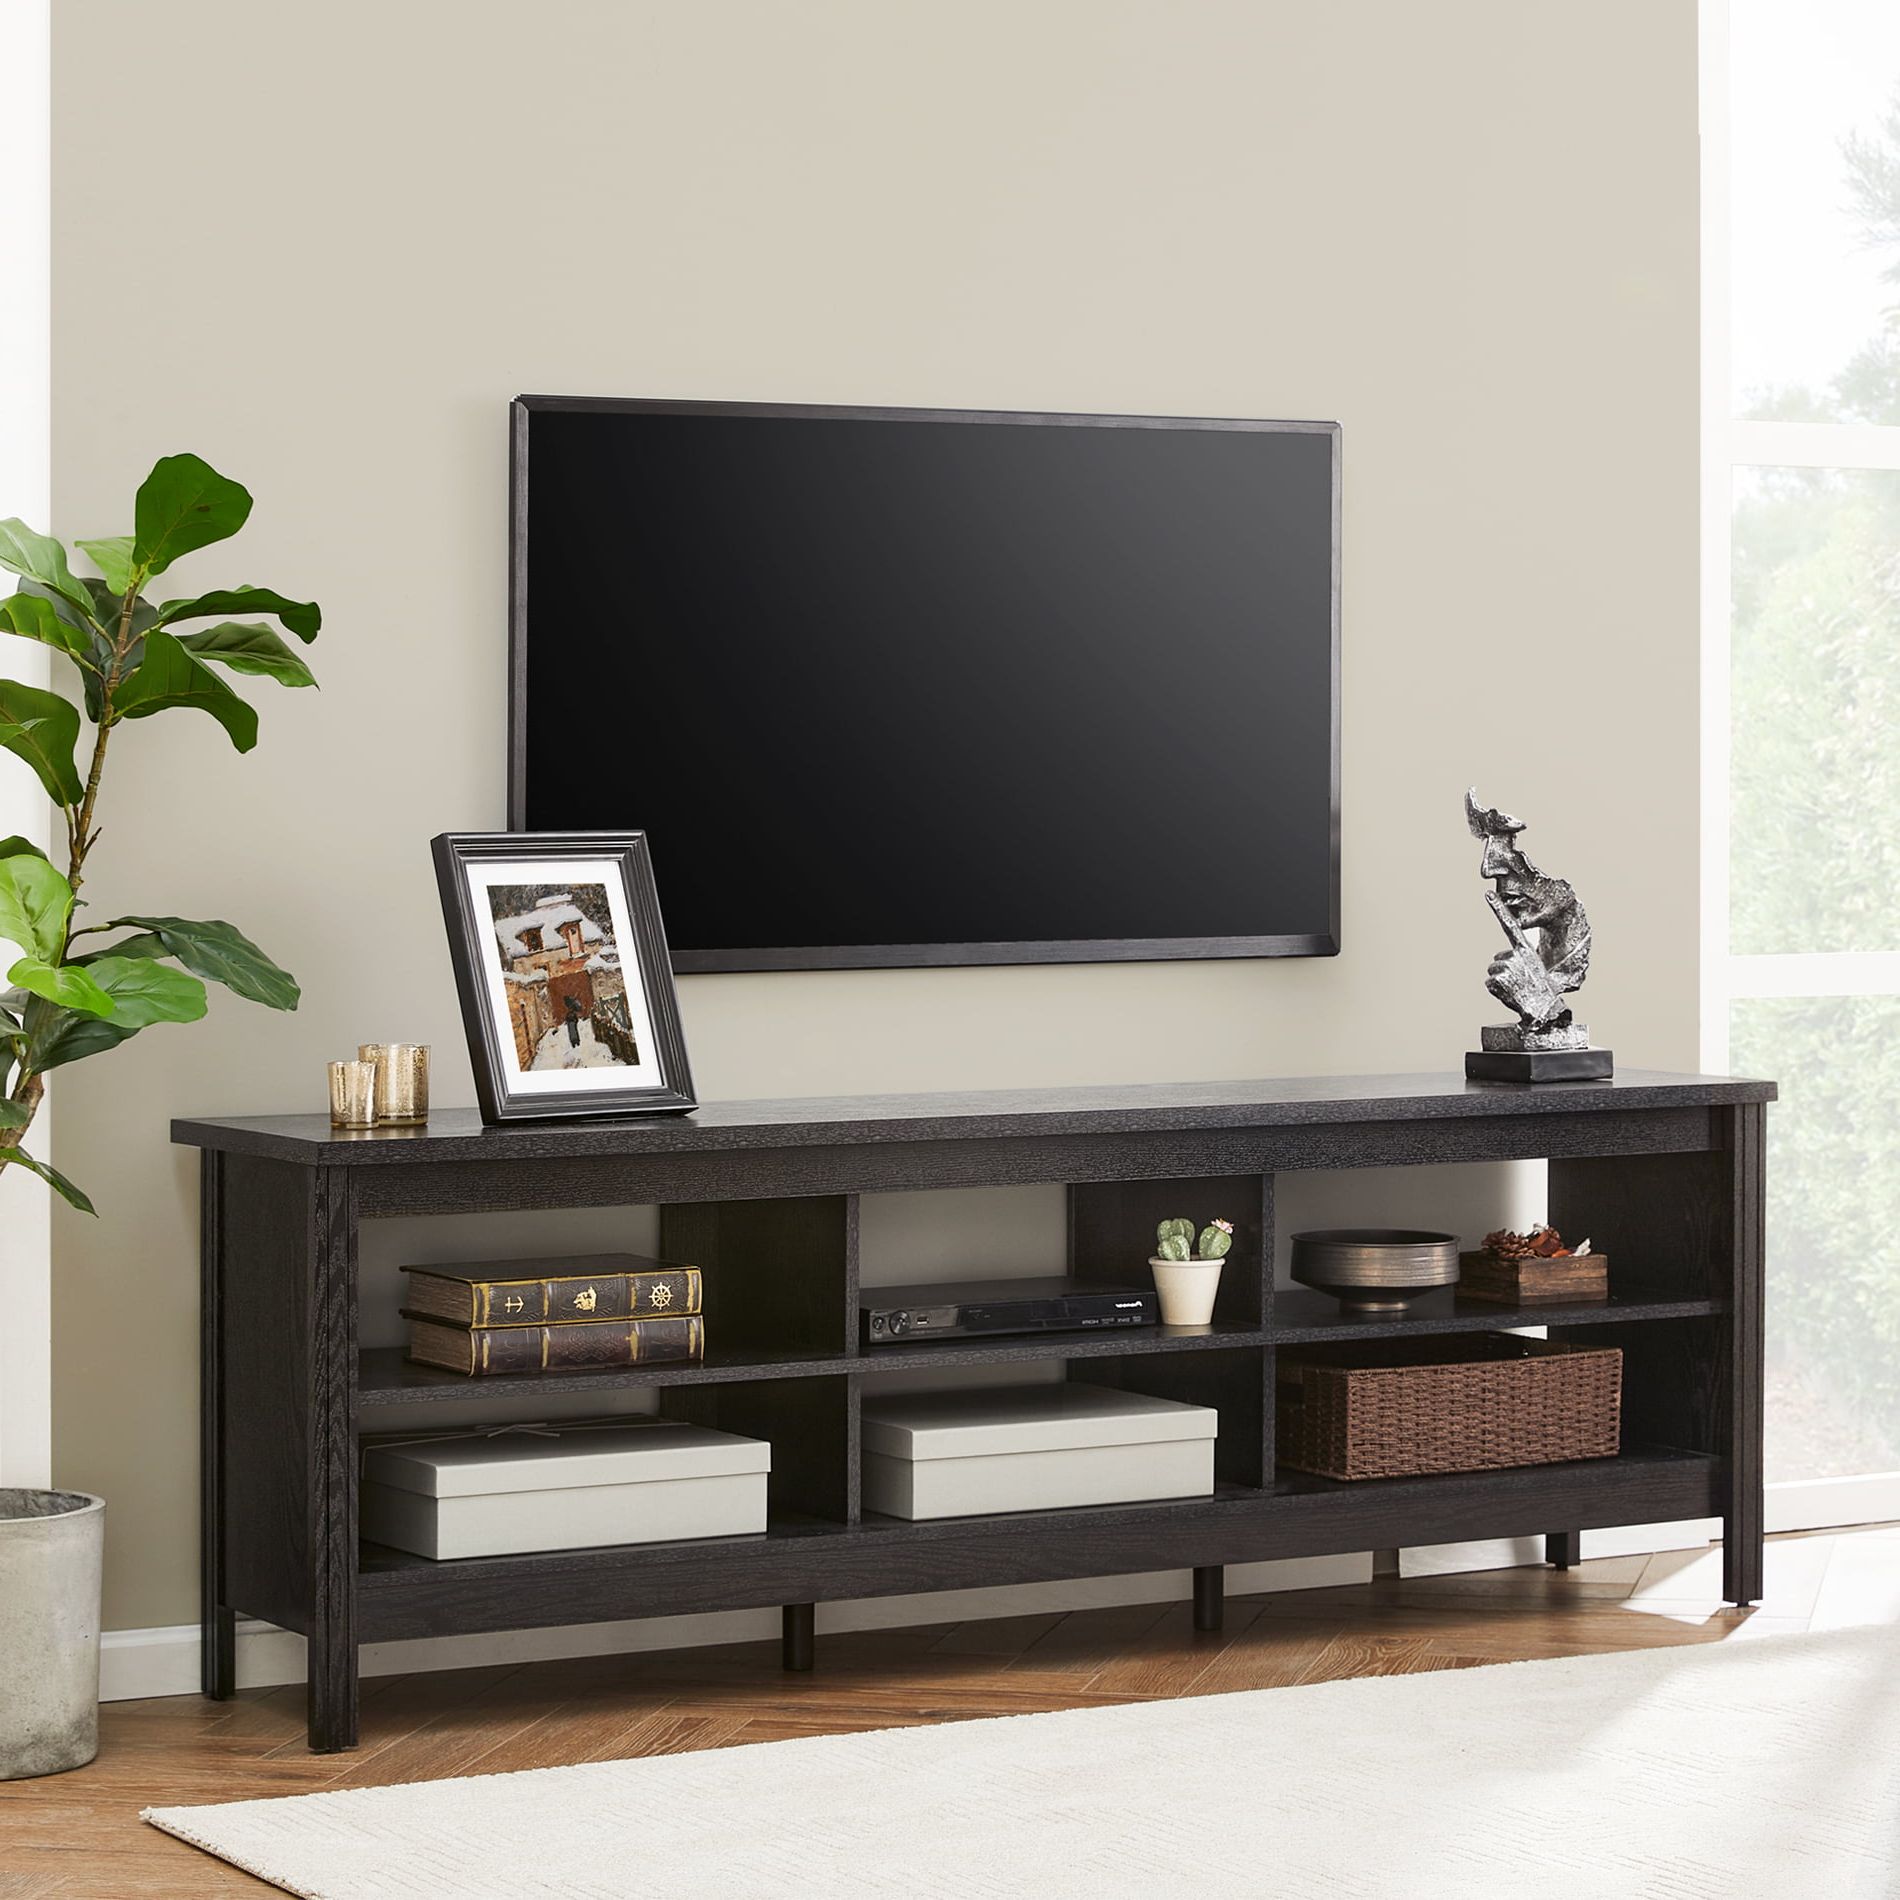 Stand For Flat Screen Intended For Favorite Farmhouse Tv Stands For 75 Inch Flat Screen Media Console Storage (View 8 of 15)